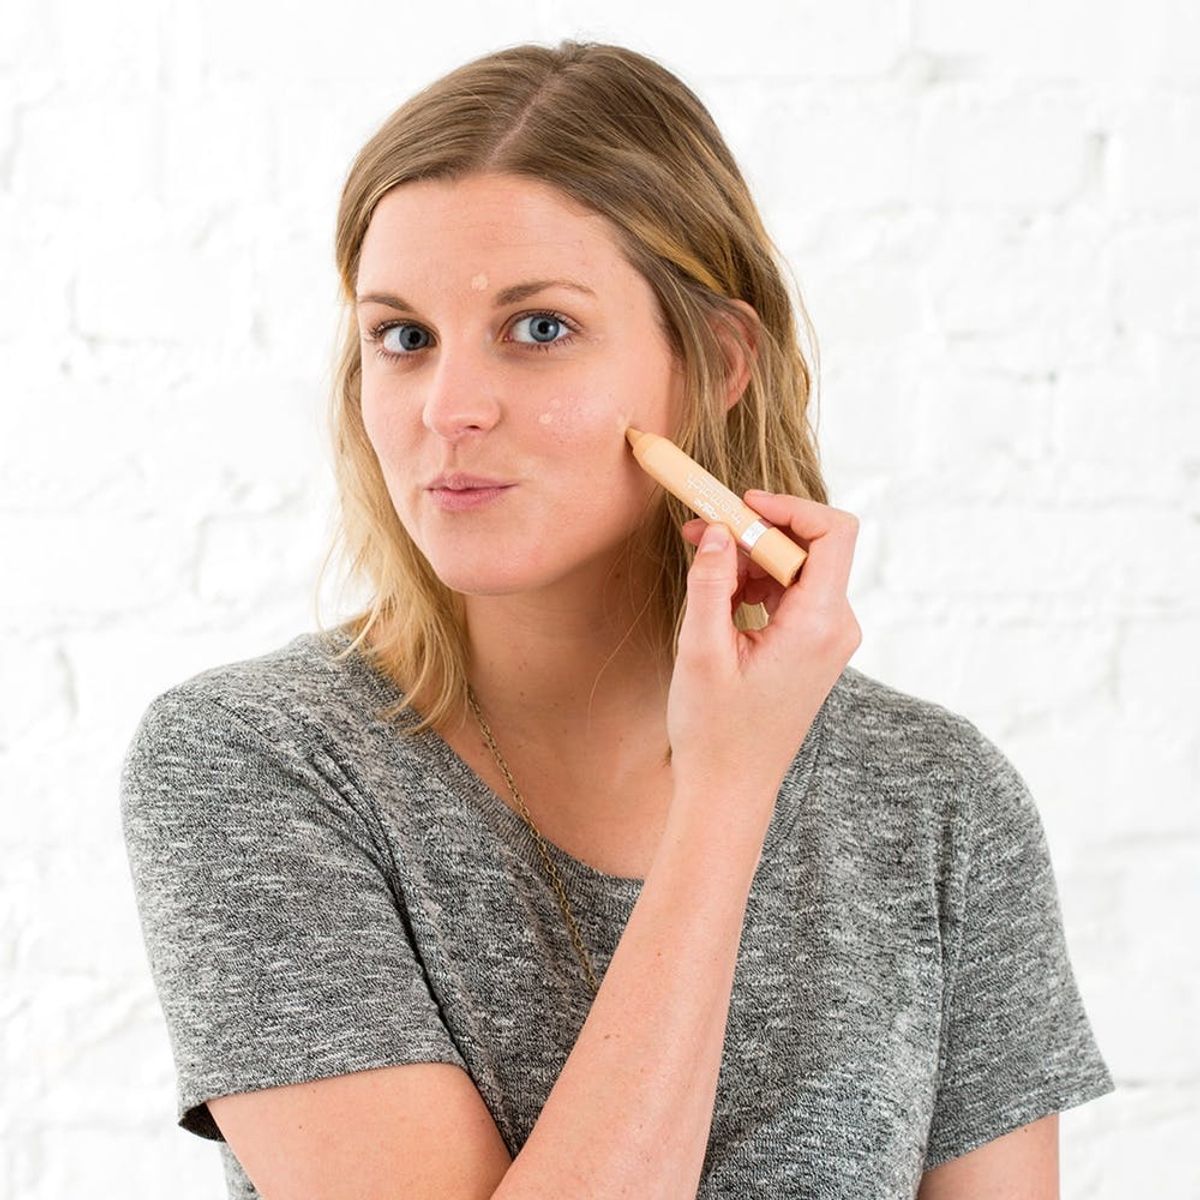 Here’s How to *Actually* Conceal a Blemish